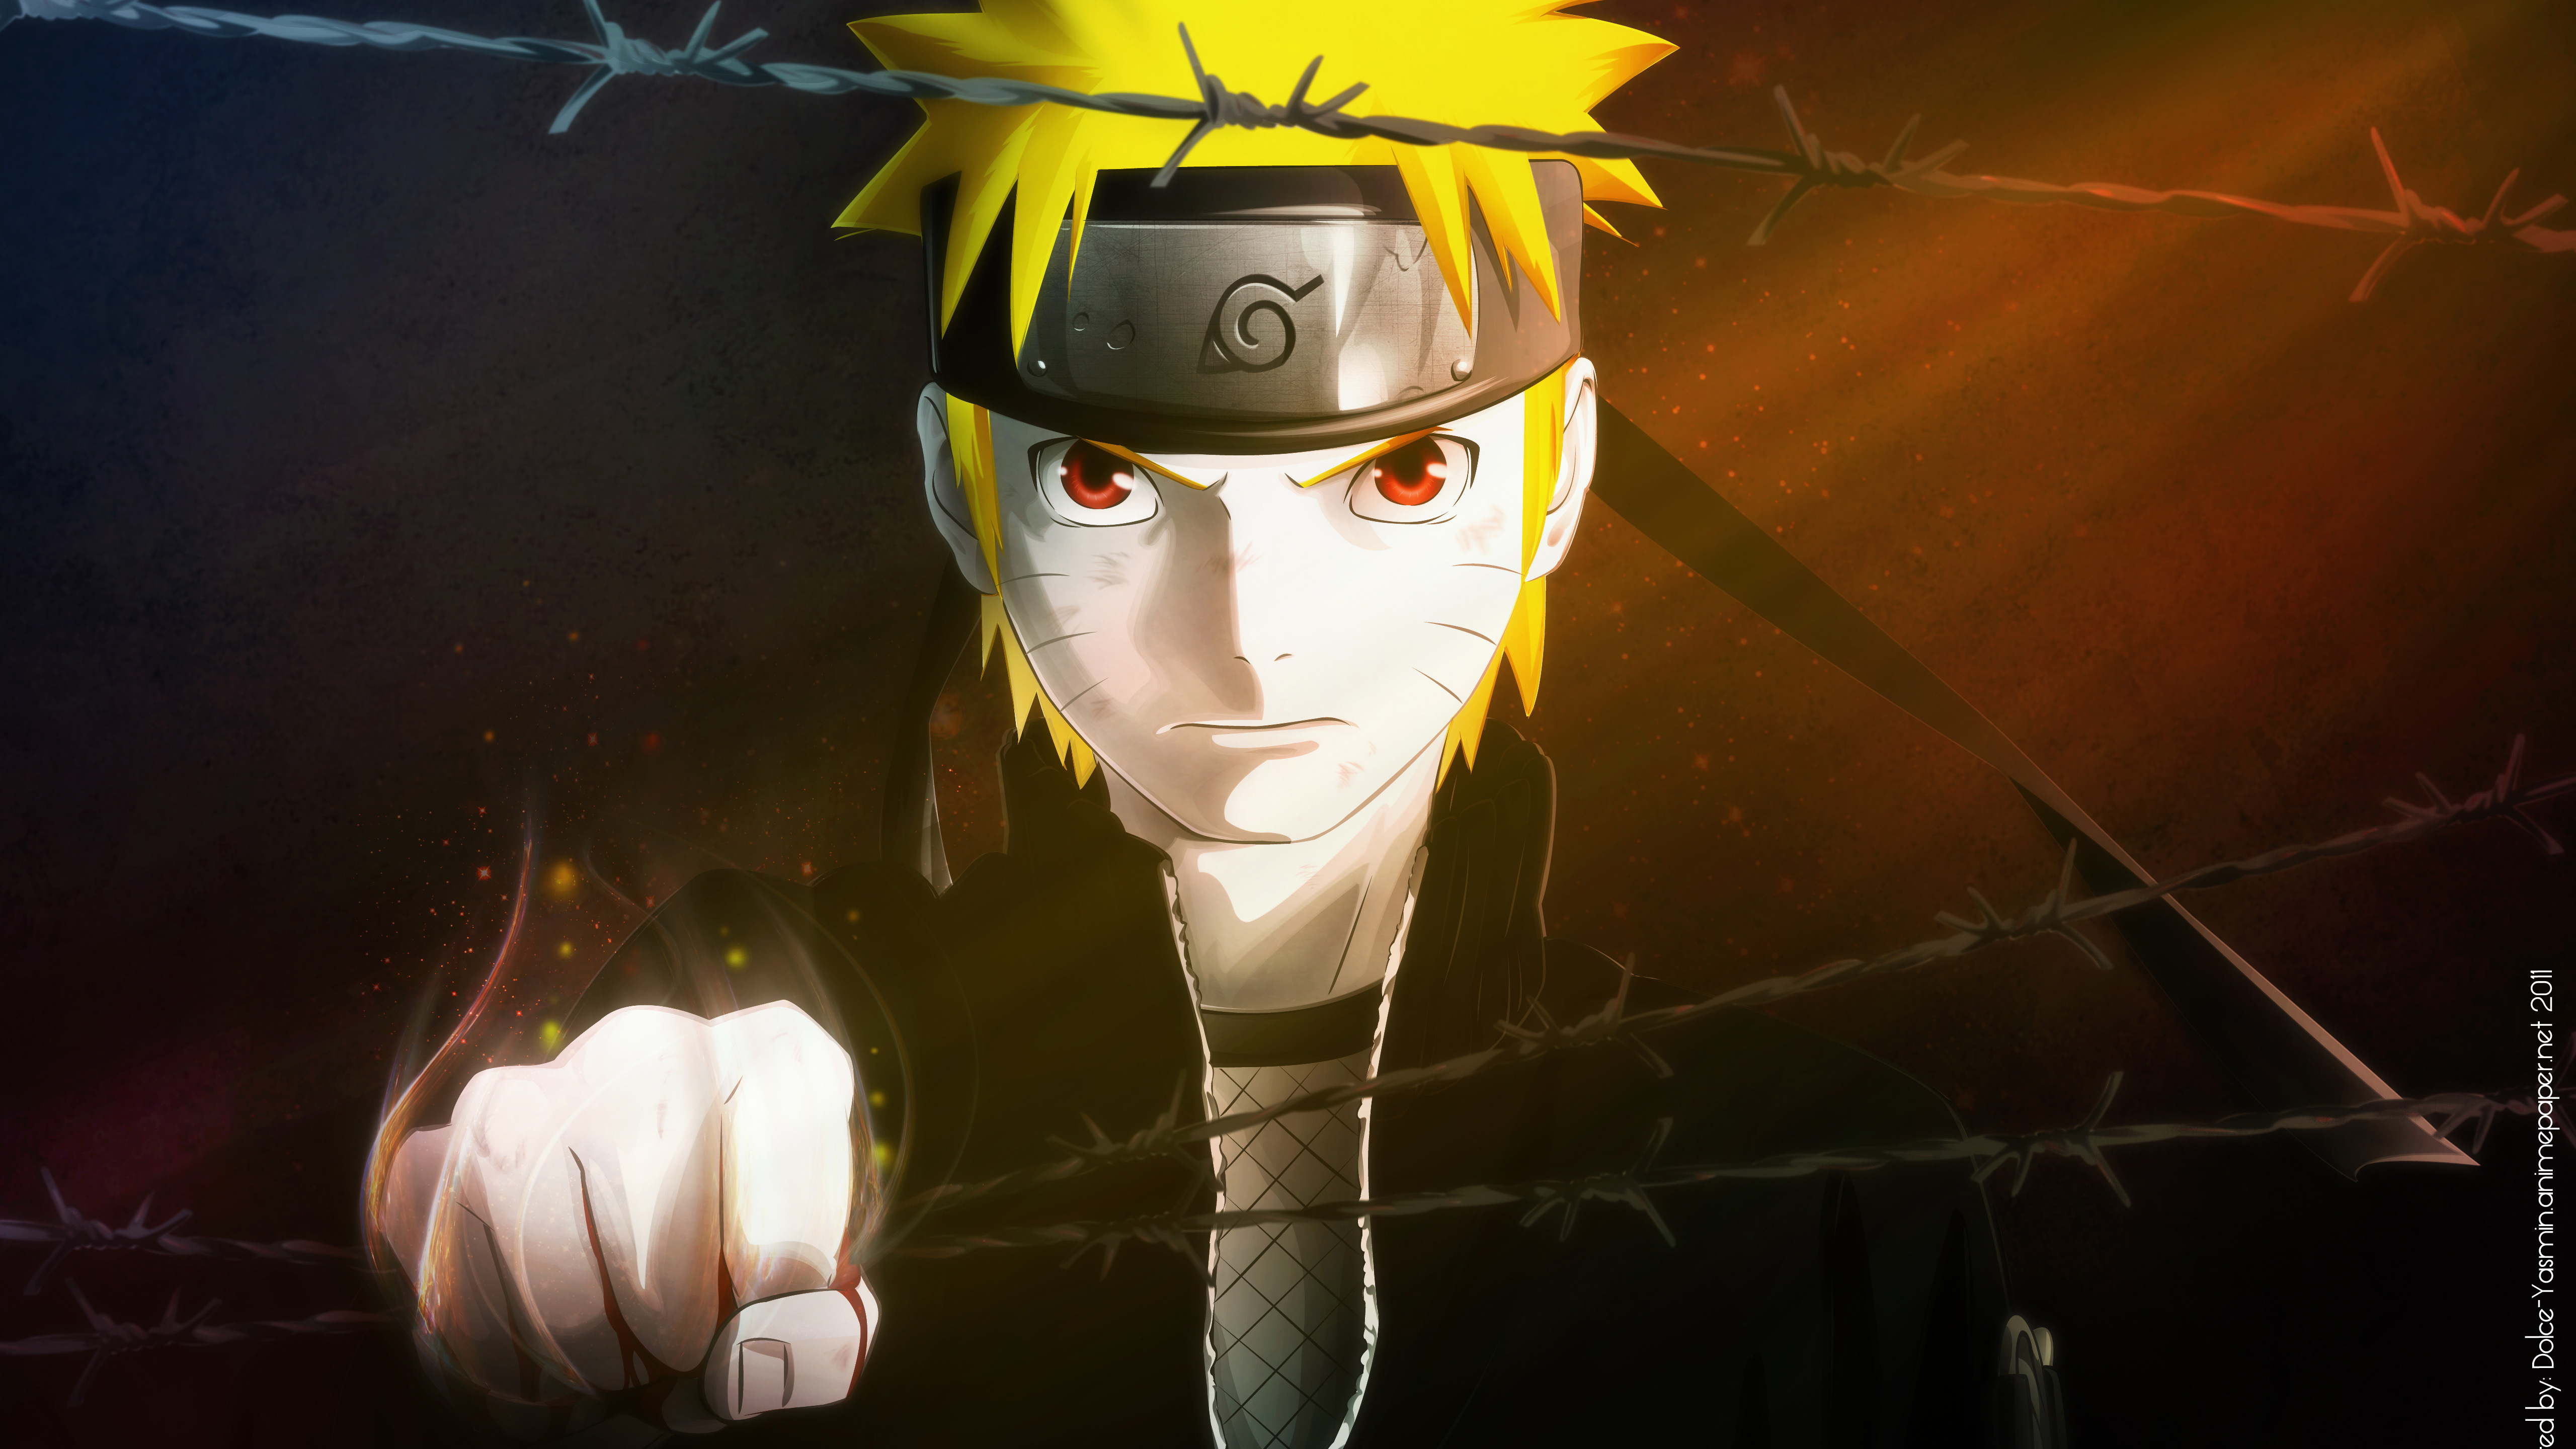 5120x2880 Naruto Anime 5k 5k Hd 4k Wallpapers Images Backgrounds